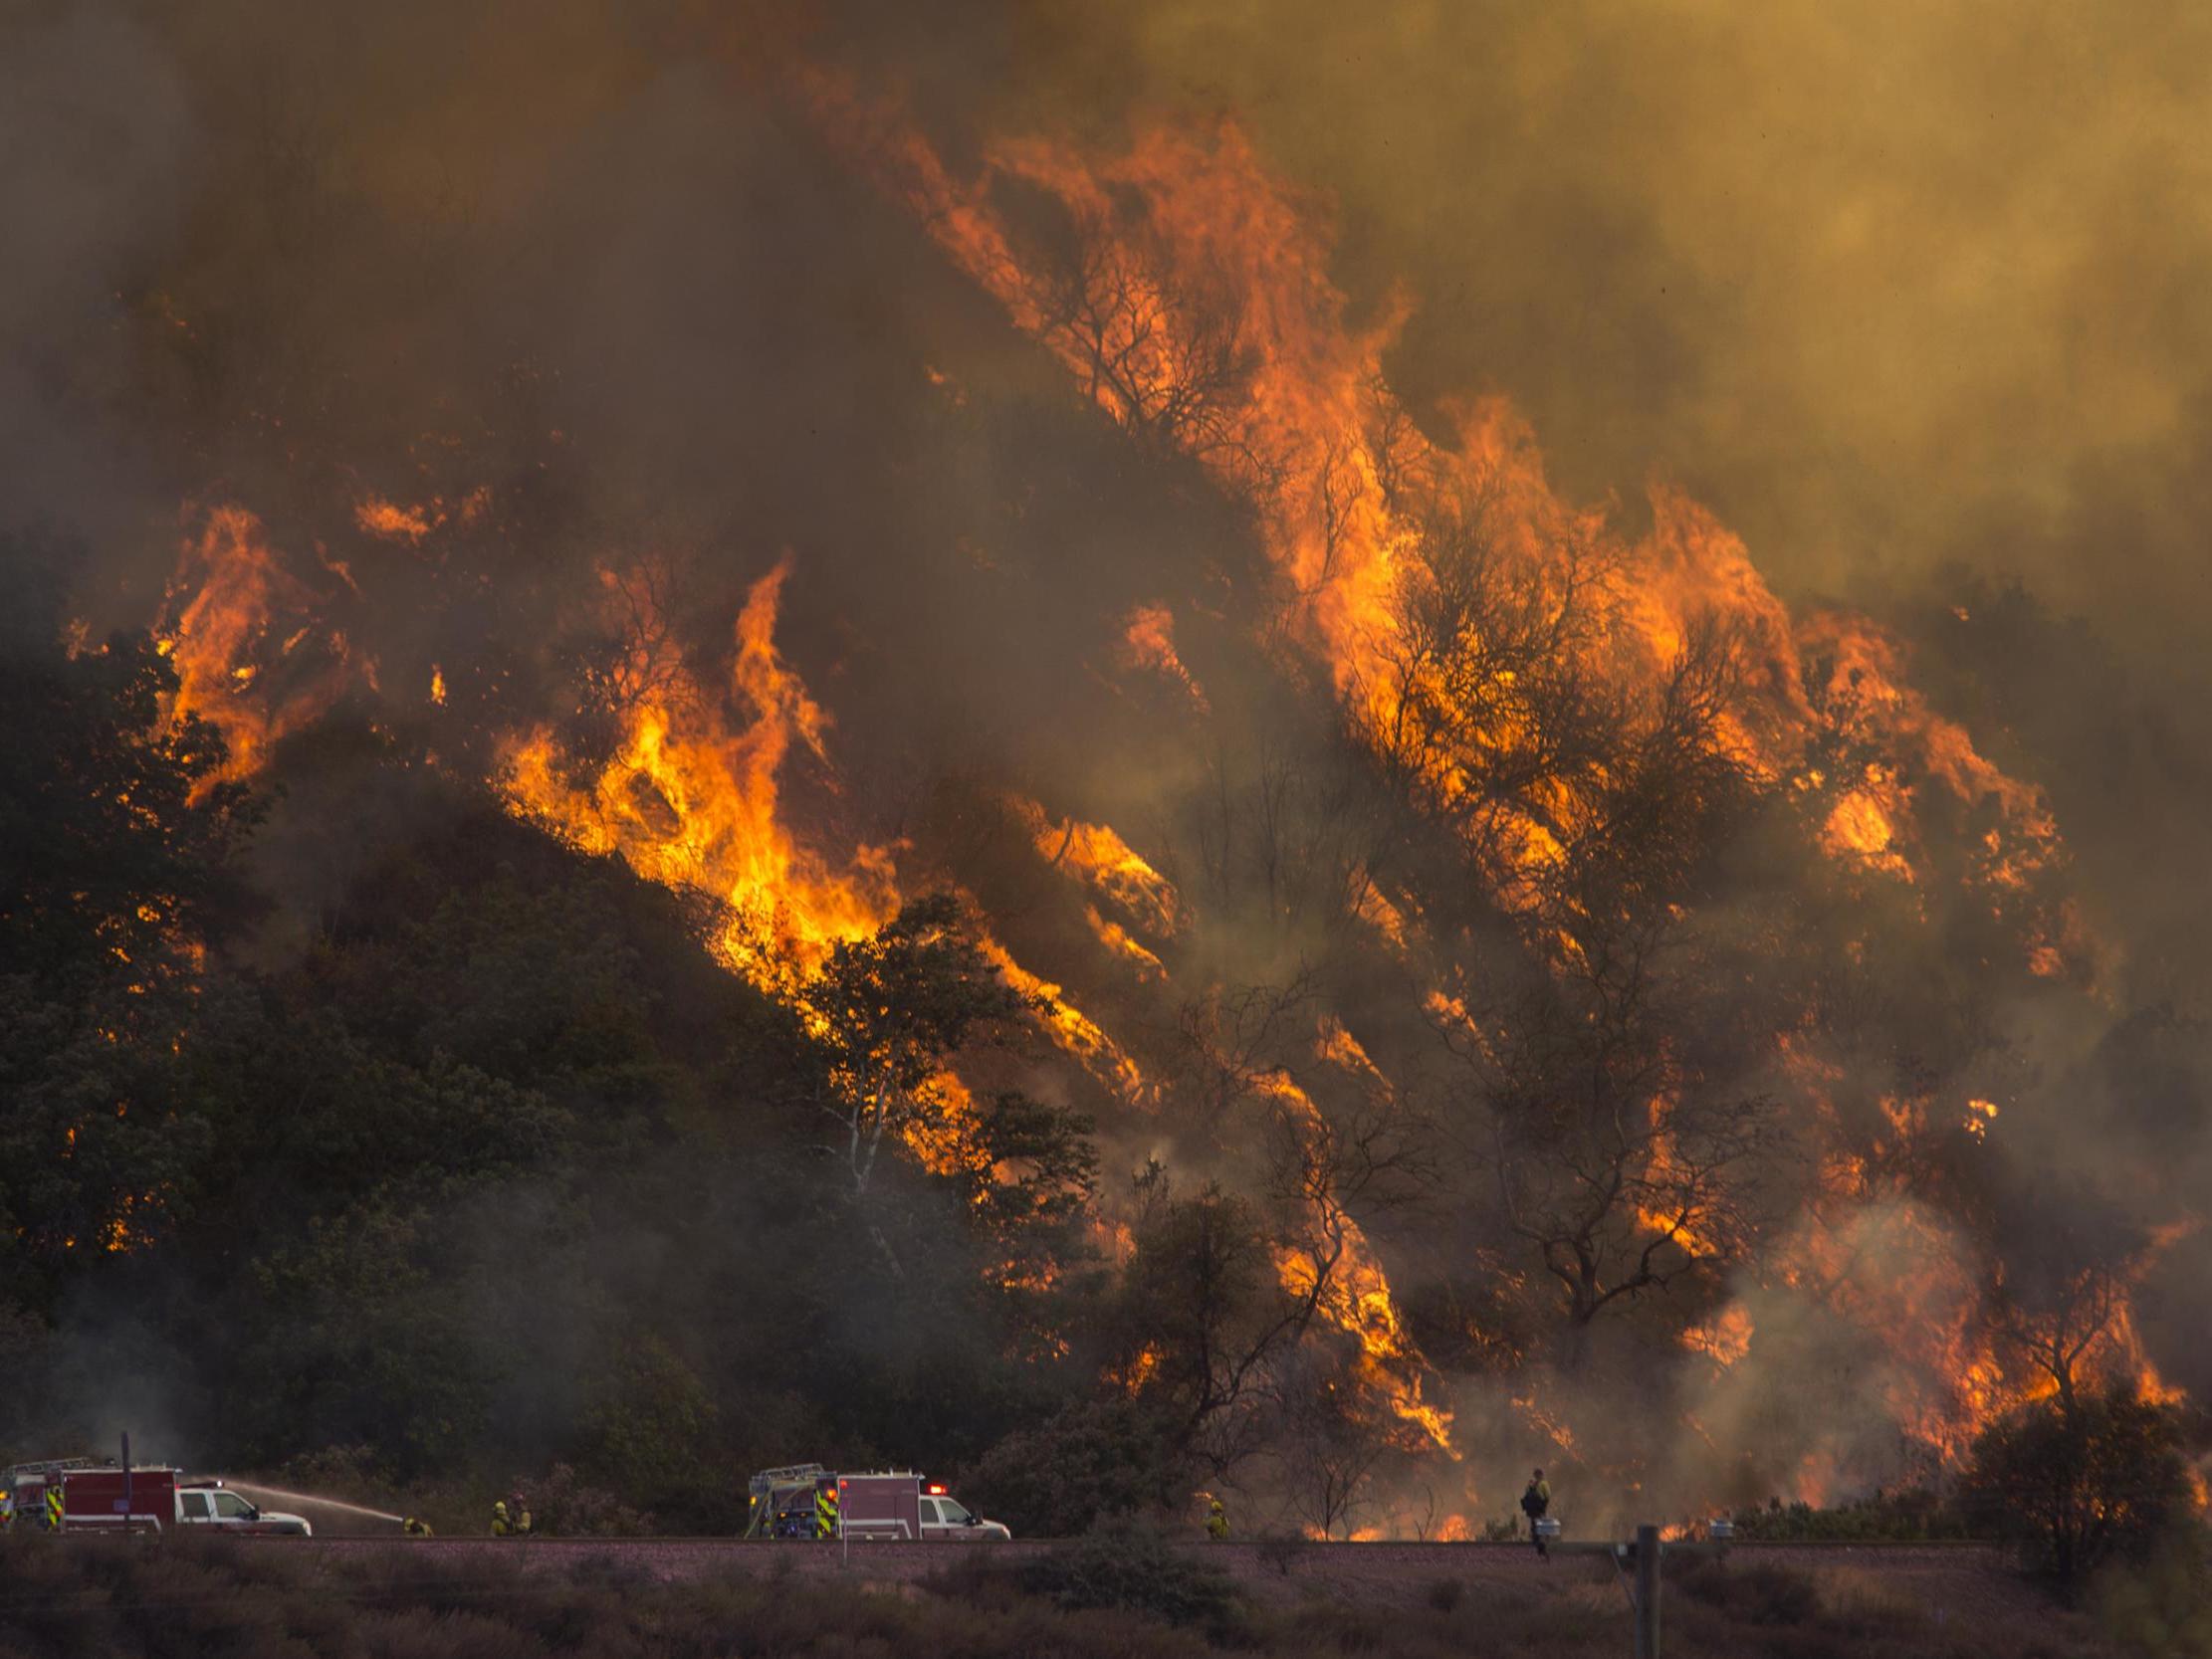 Flames spread up a hillside near firefighters at the Blue Cut Fire near Wrightwood, California